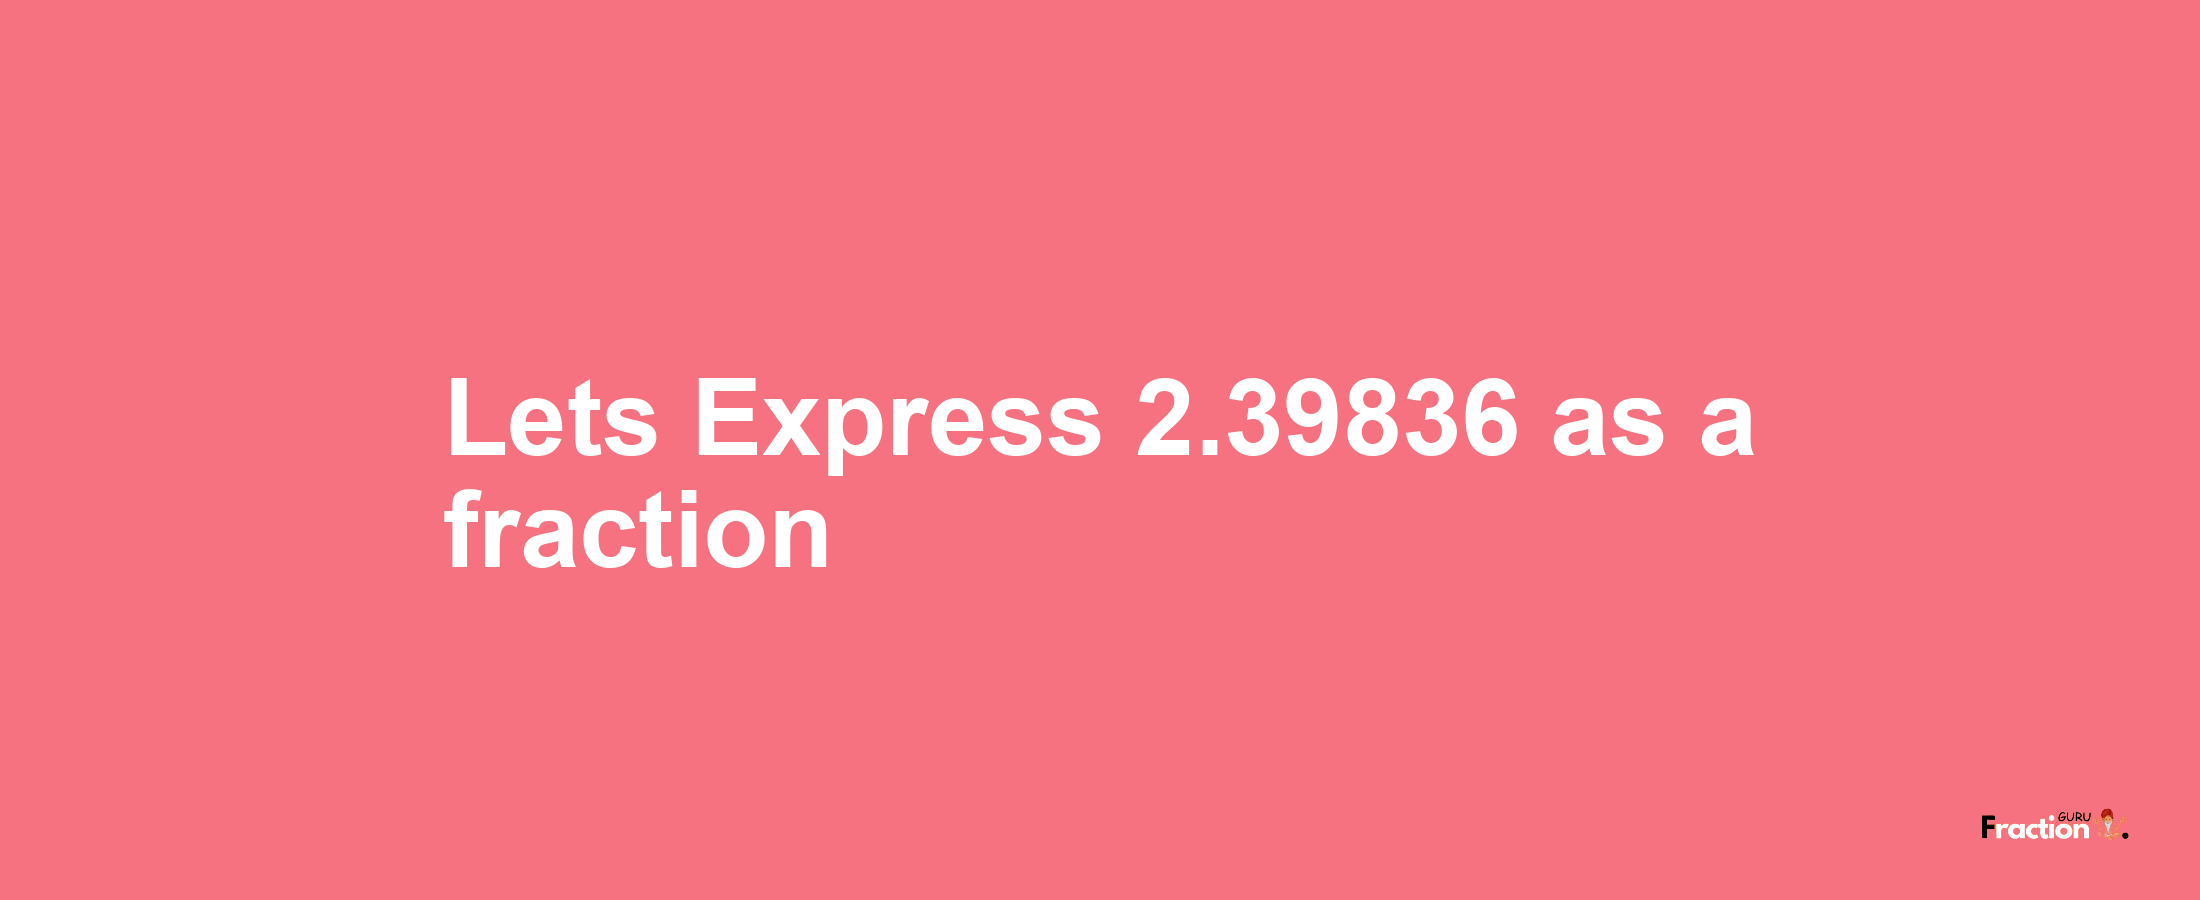 Lets Express 2.39836 as afraction